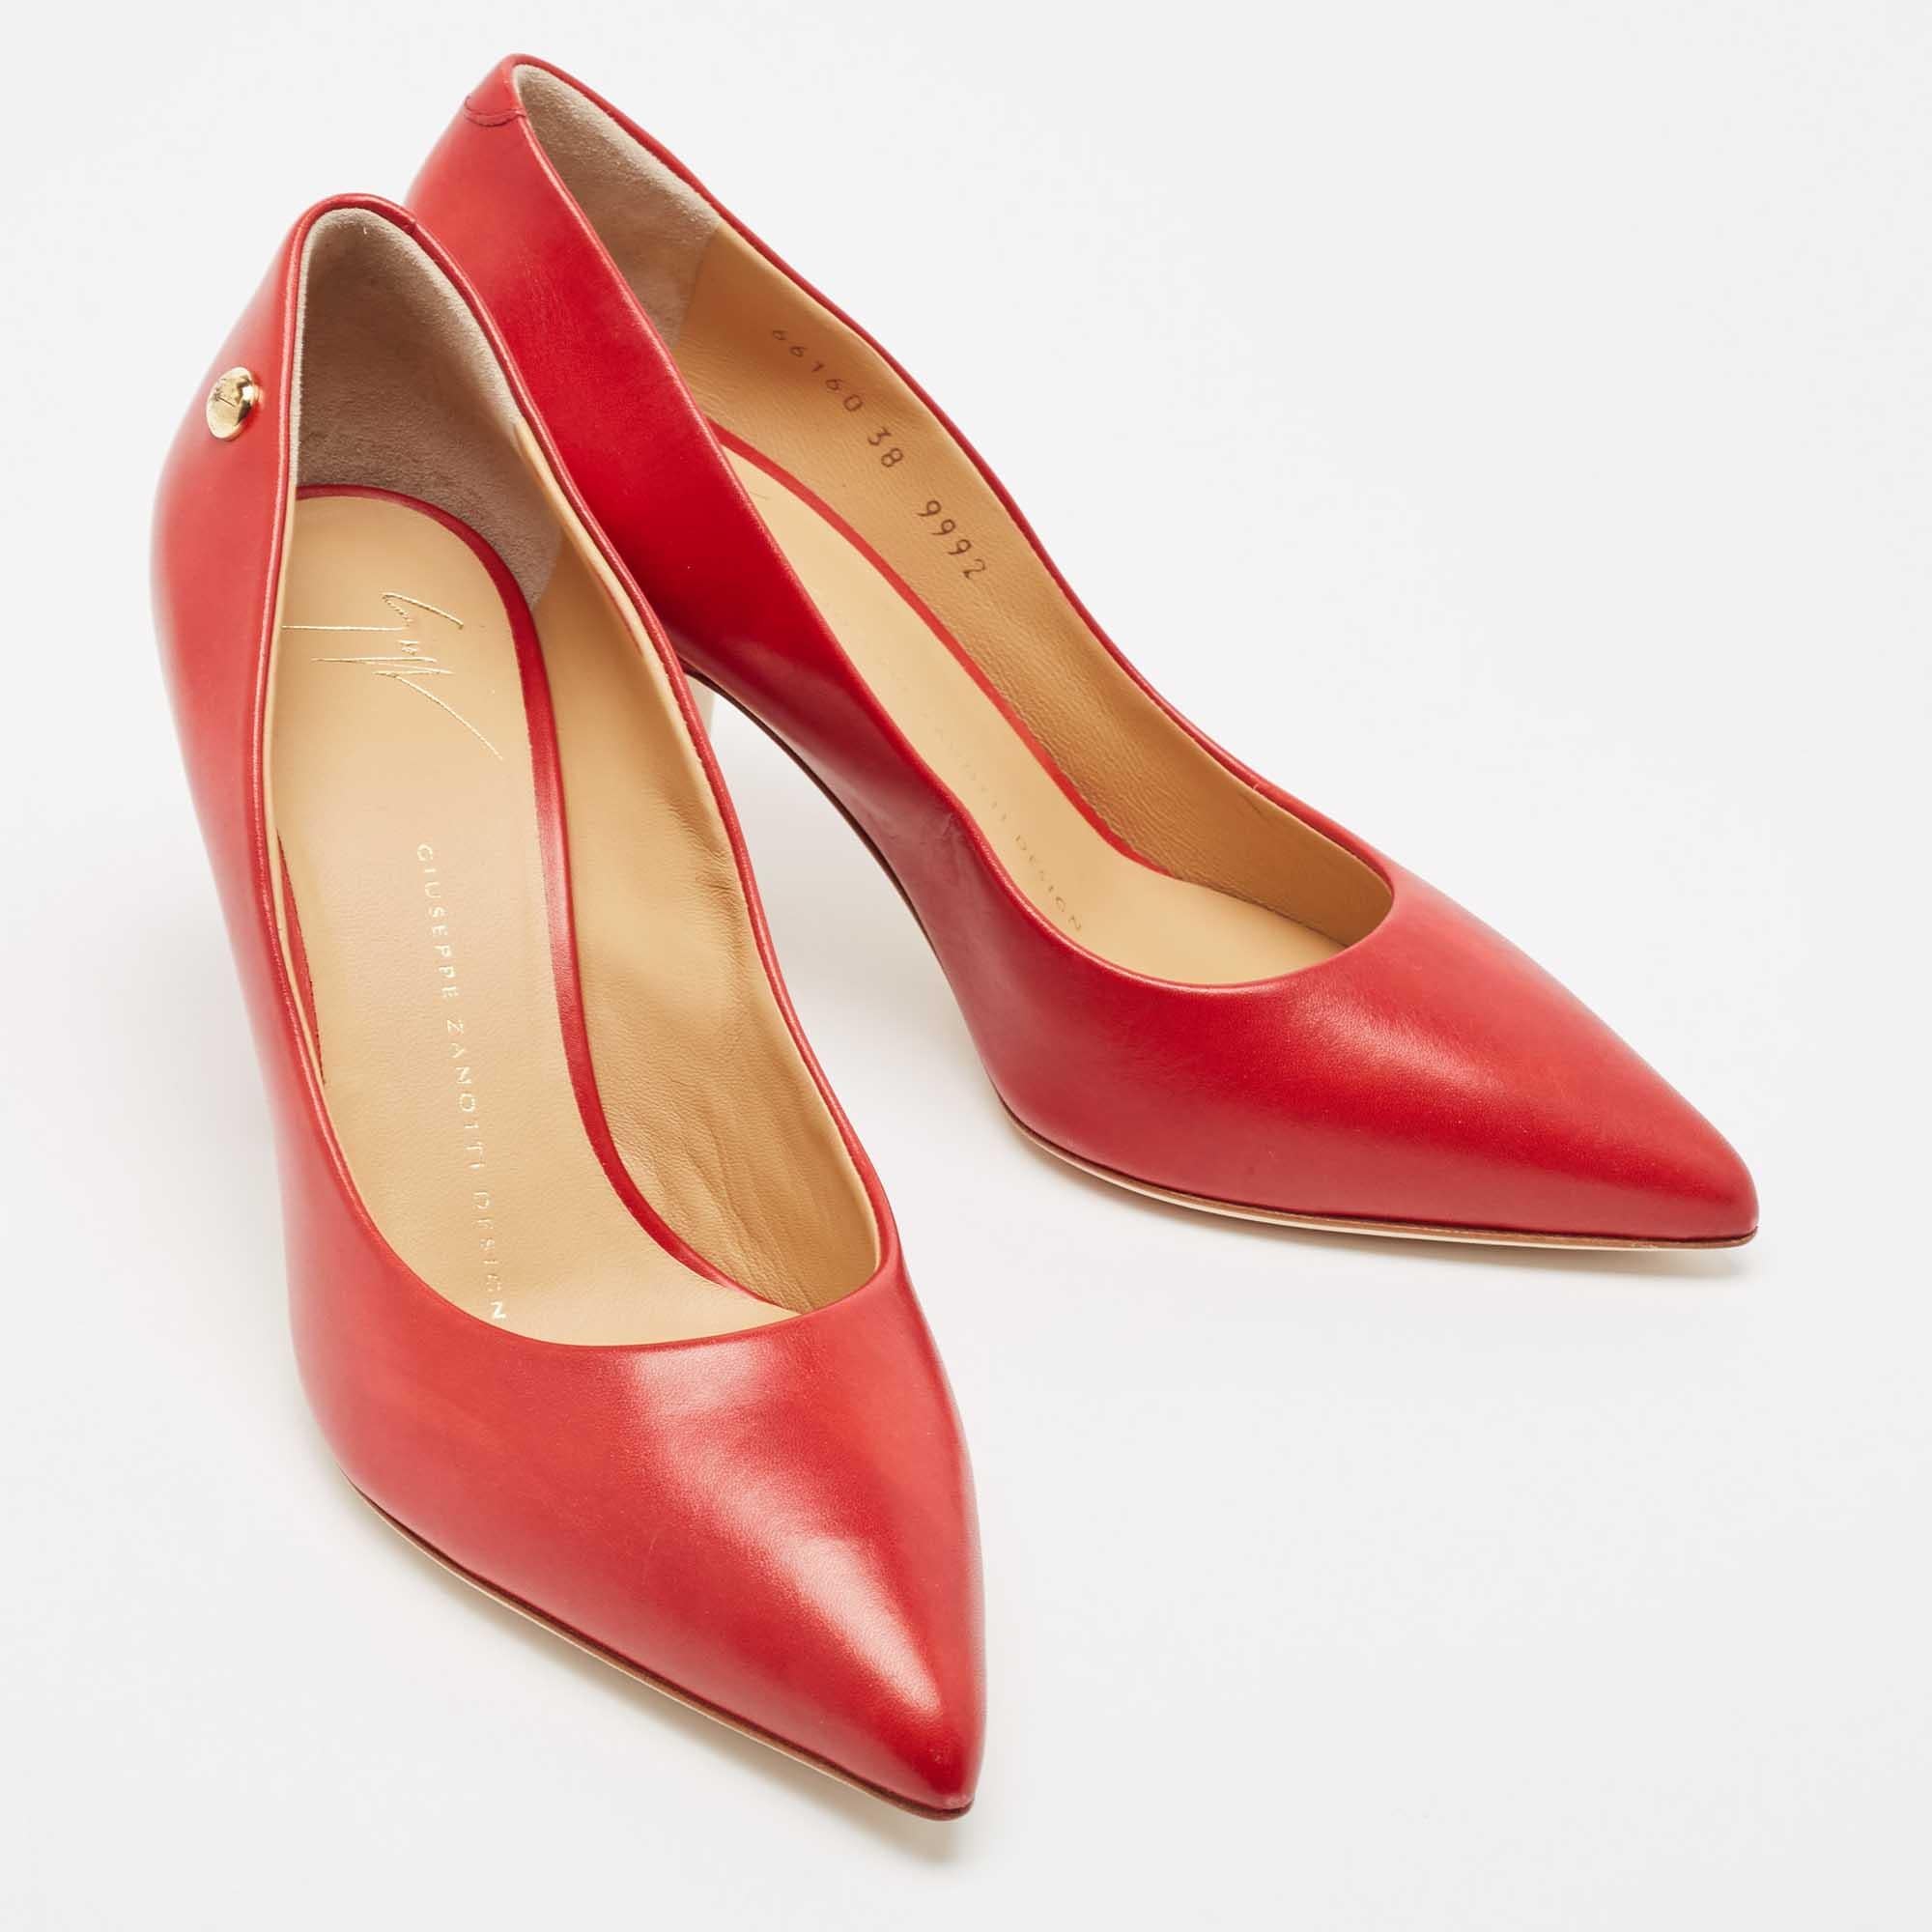 Giuseppe Zanotti Red Leather Pointed Toe Pumps Size 38 4